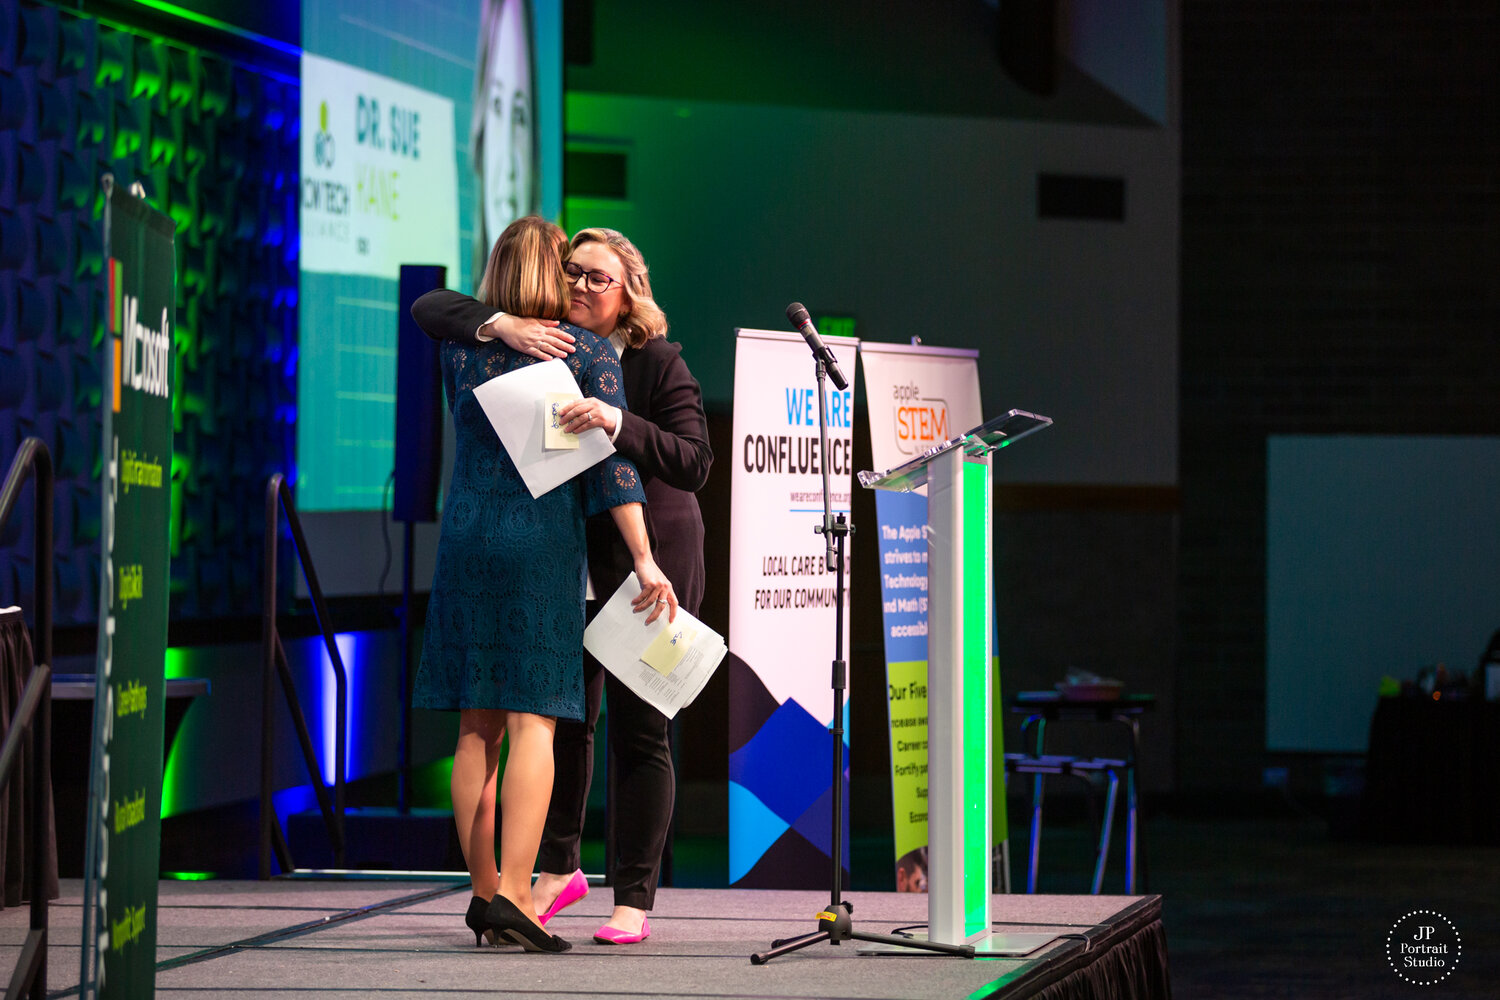 Outgoing NCW Tech Alliance Executive Director Jenny Rojanasthien embraces Dr. Sue Kane, the new CEO of NCW Tech Alliance.